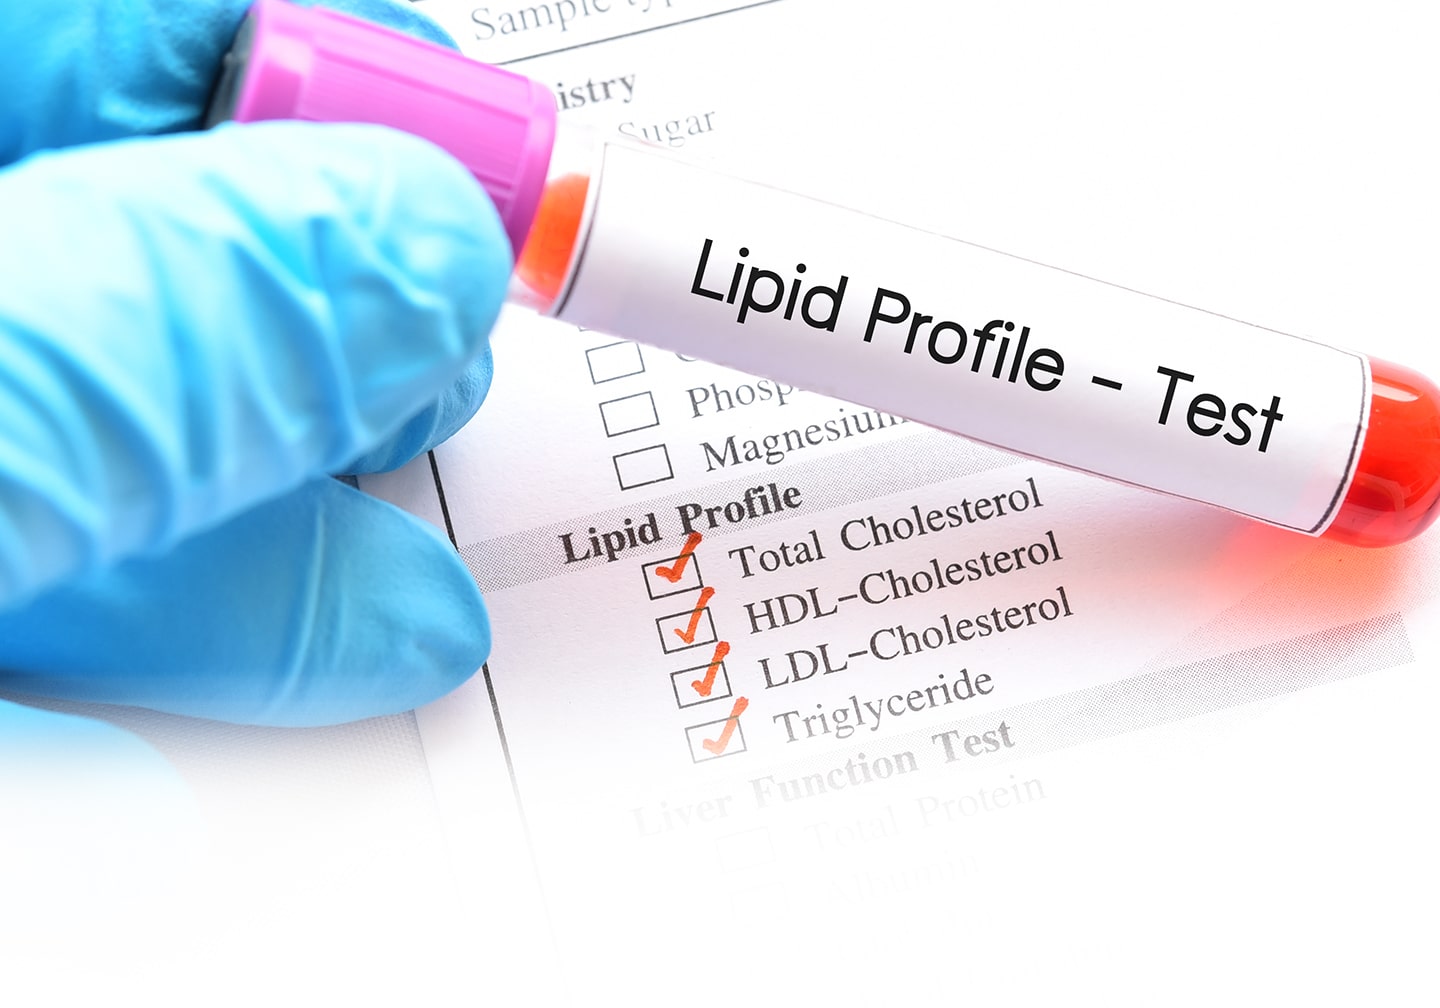 details of the lipid profile test